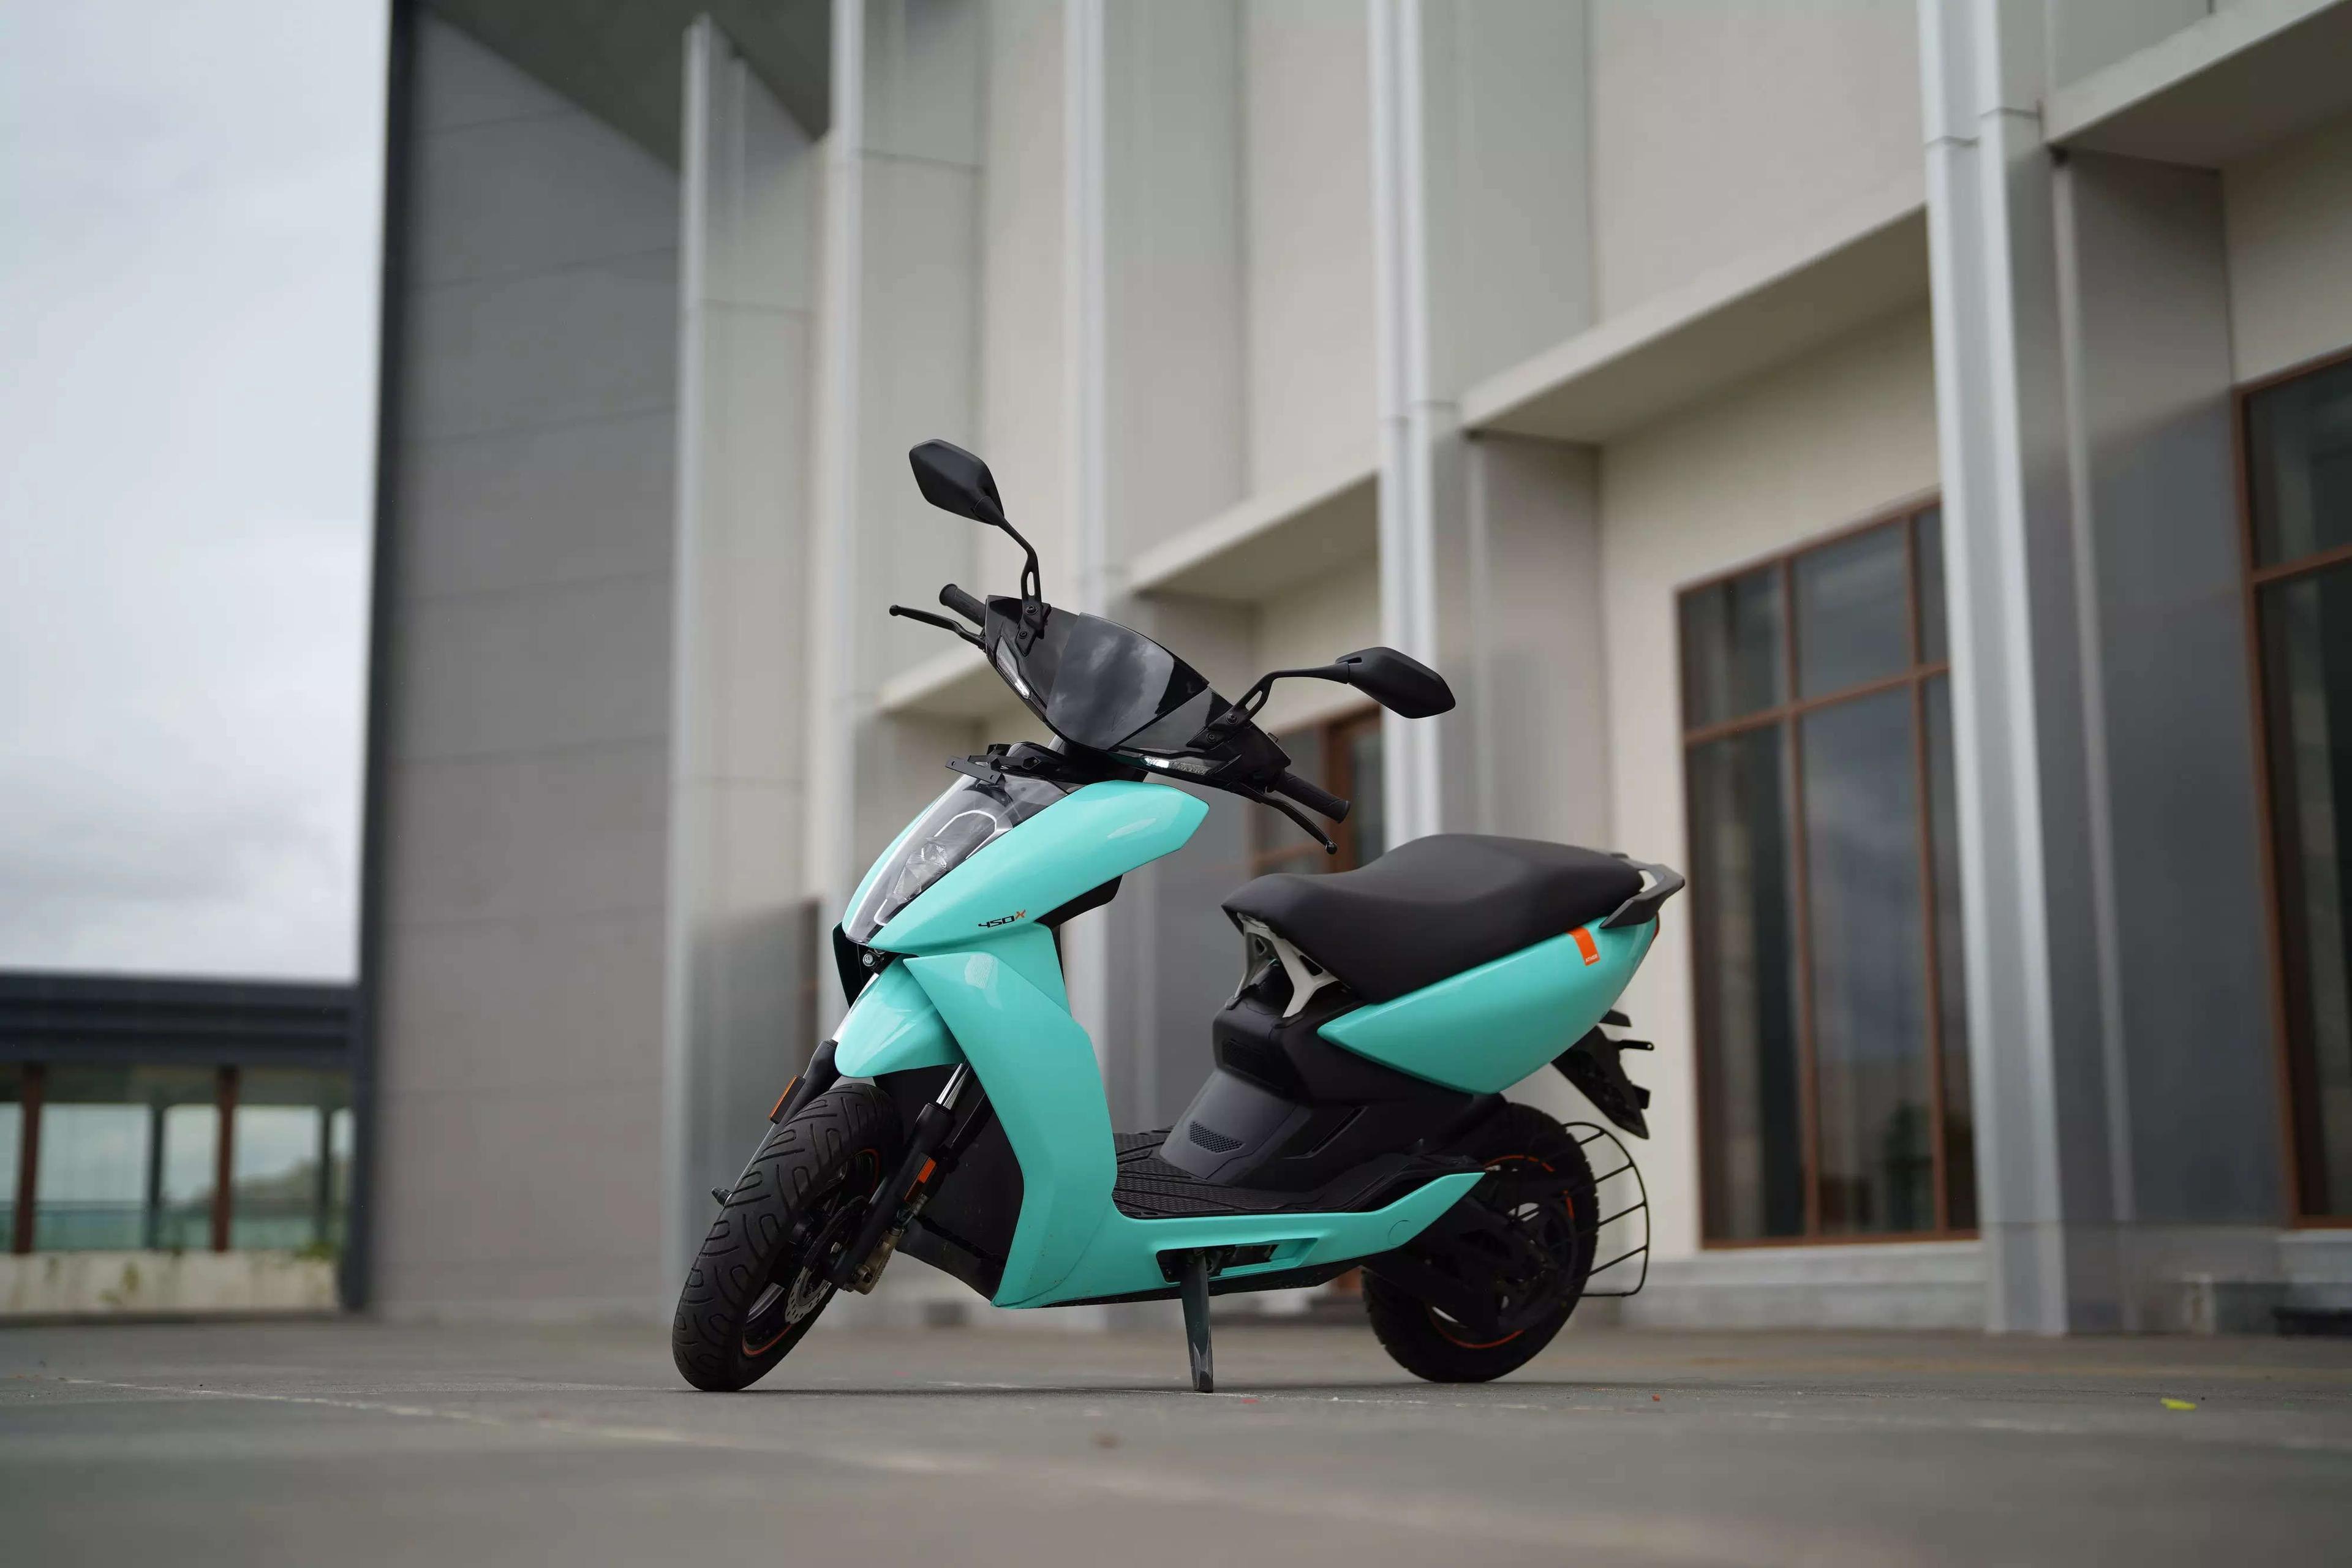 Ather 450 Gen 3 EV Price, Features, Specs & What’s New for 2022